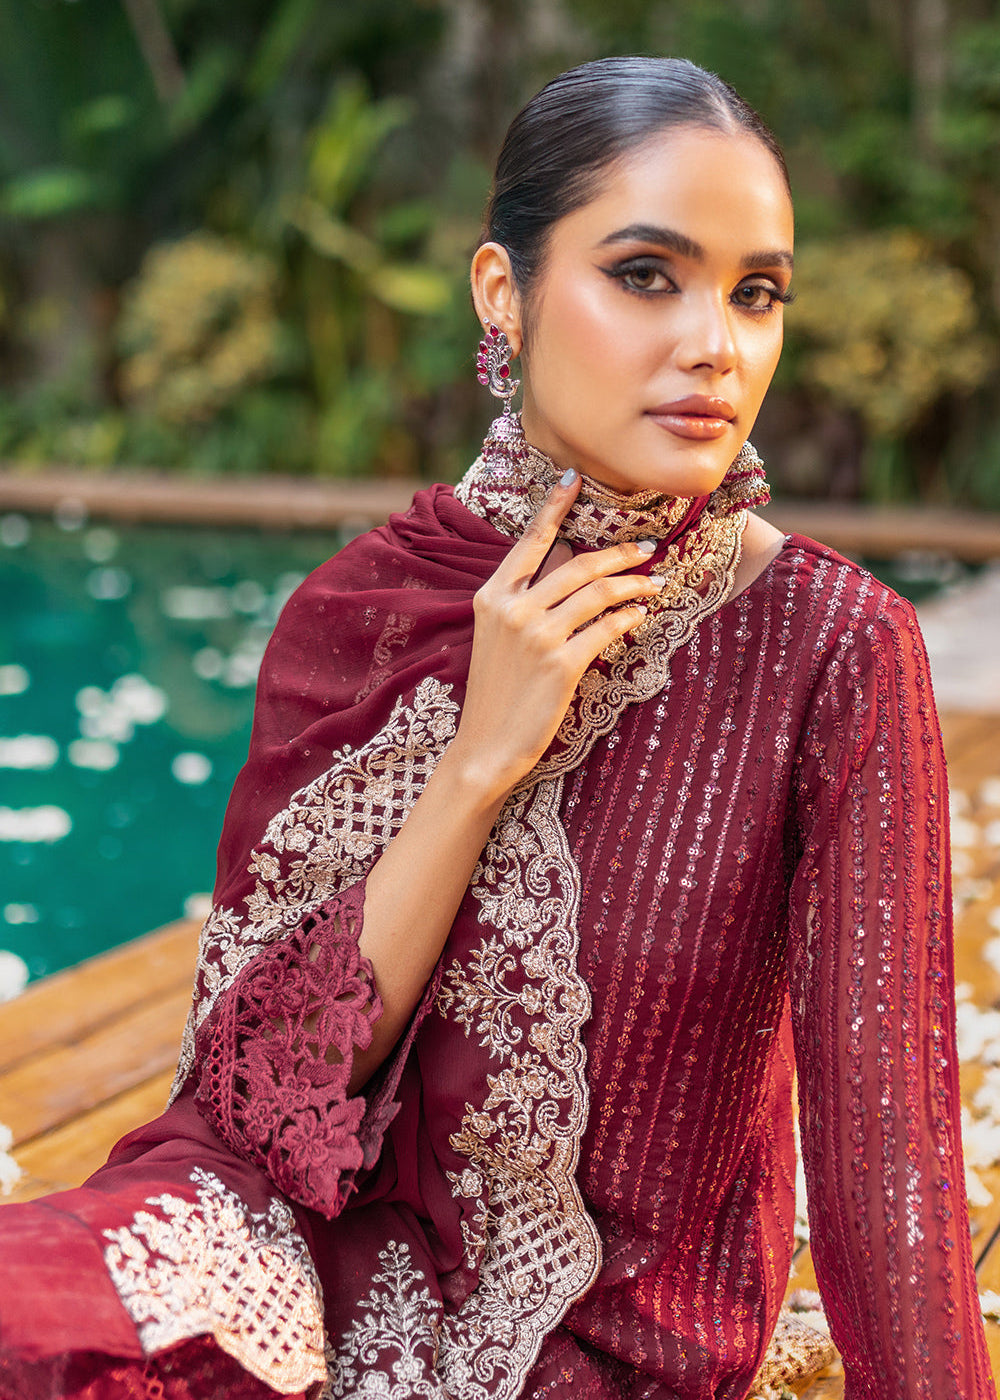 Buy Now Azure Luxe Festive Embroidered by Ahmed Patel | Crimson Rush Online in USA, UK, Canada & Worldwide at Empress Clothing.